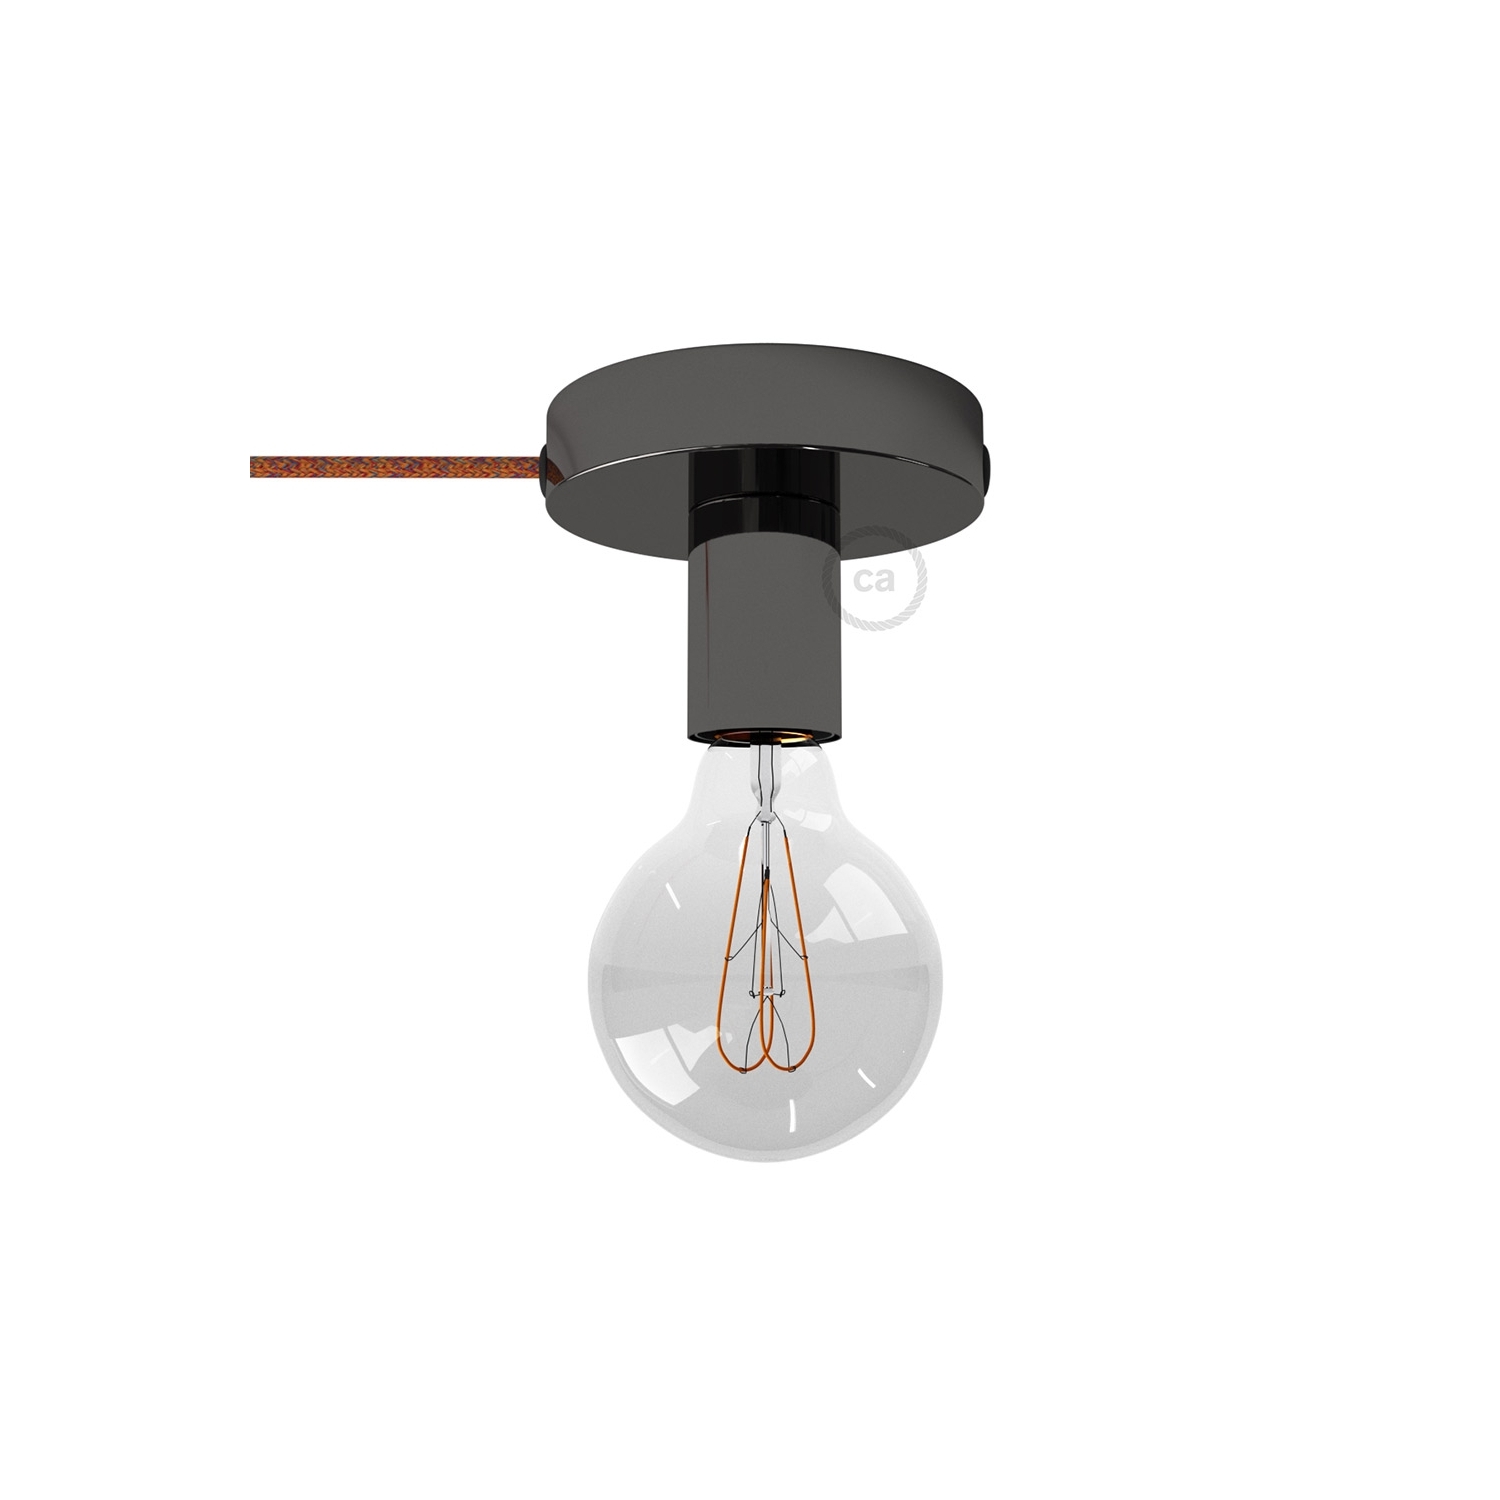 Spostaluce, the black pearl metal light source with fabric cable and side holes